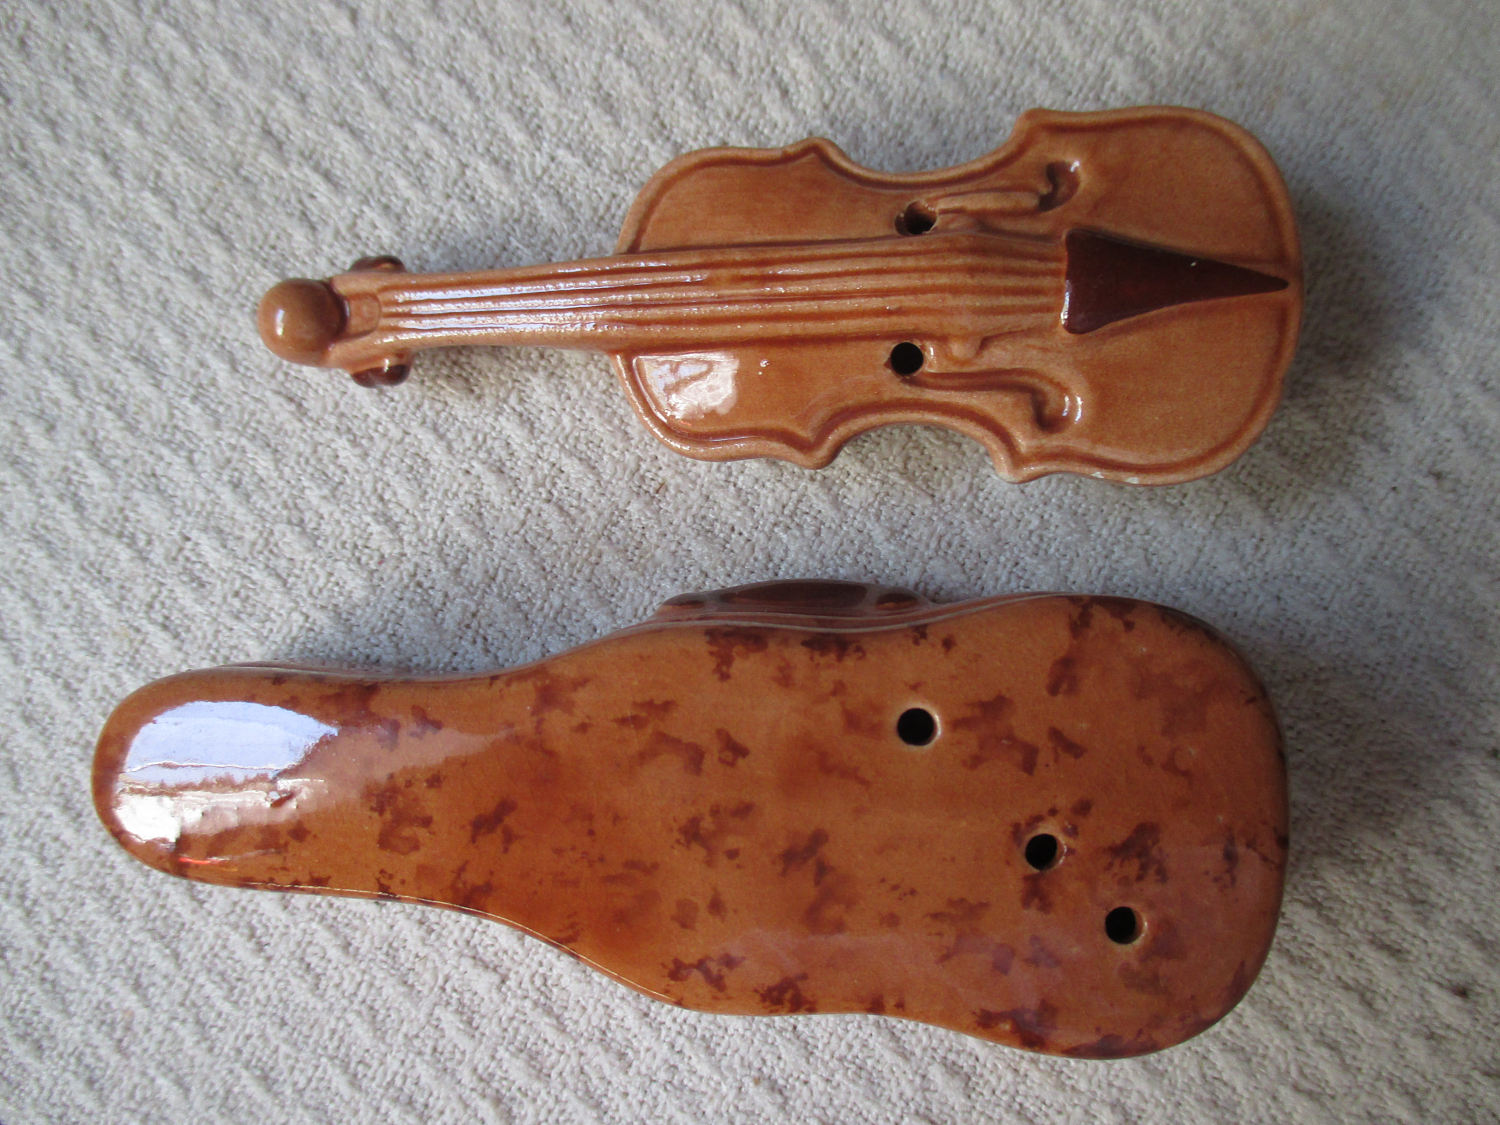 The Violin and the Mandolin in Japan